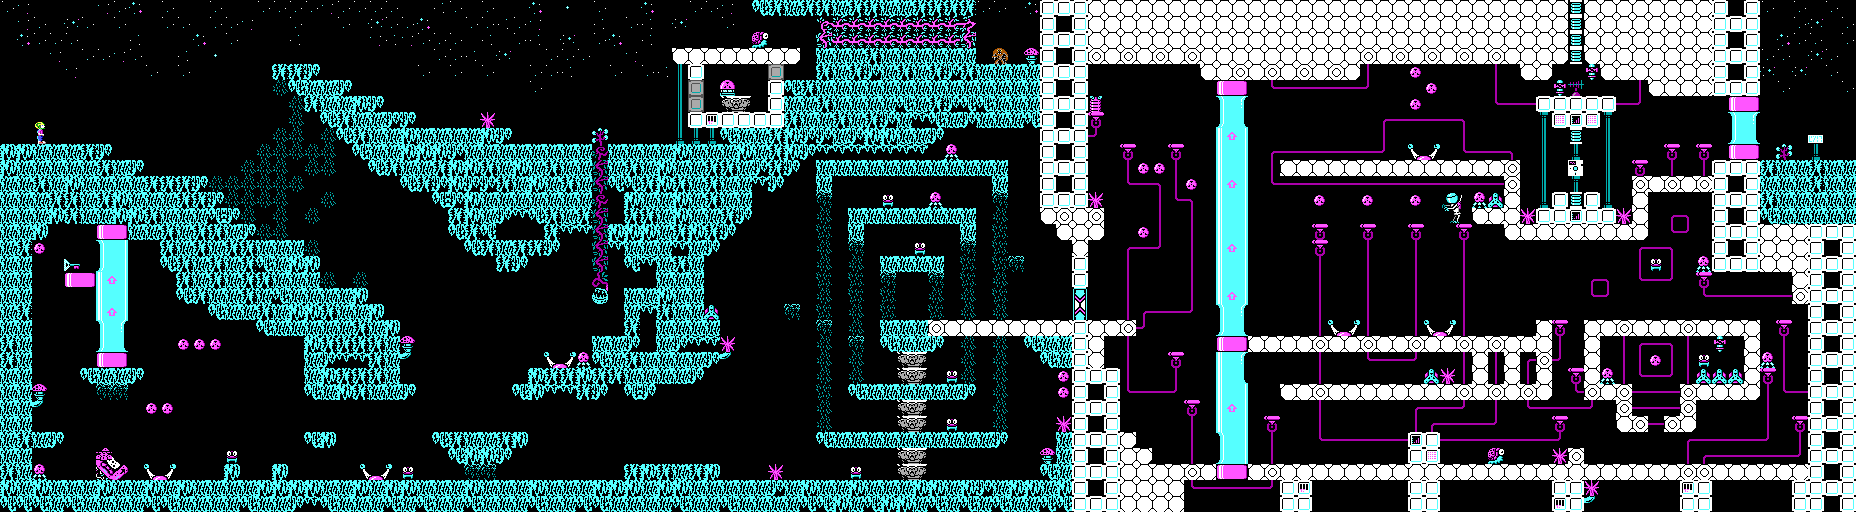 Commander Keen Confronts the Commandeered Planet - Level 04.png